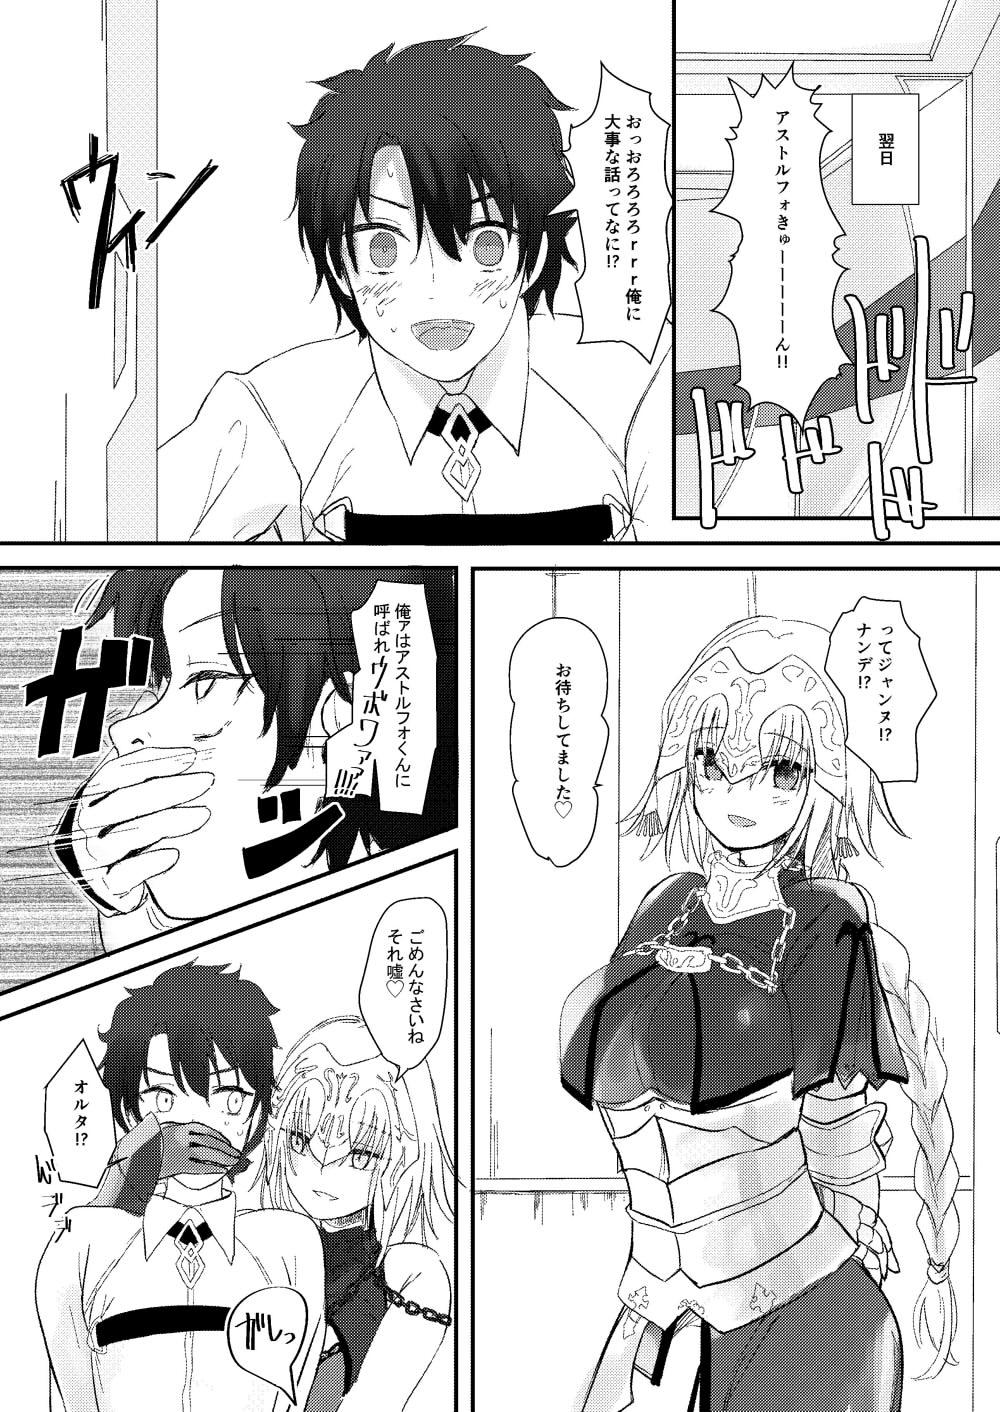 Cougar Jeanne to Boku to Jeanne - Fate grand order Gay Handjob - Page 4